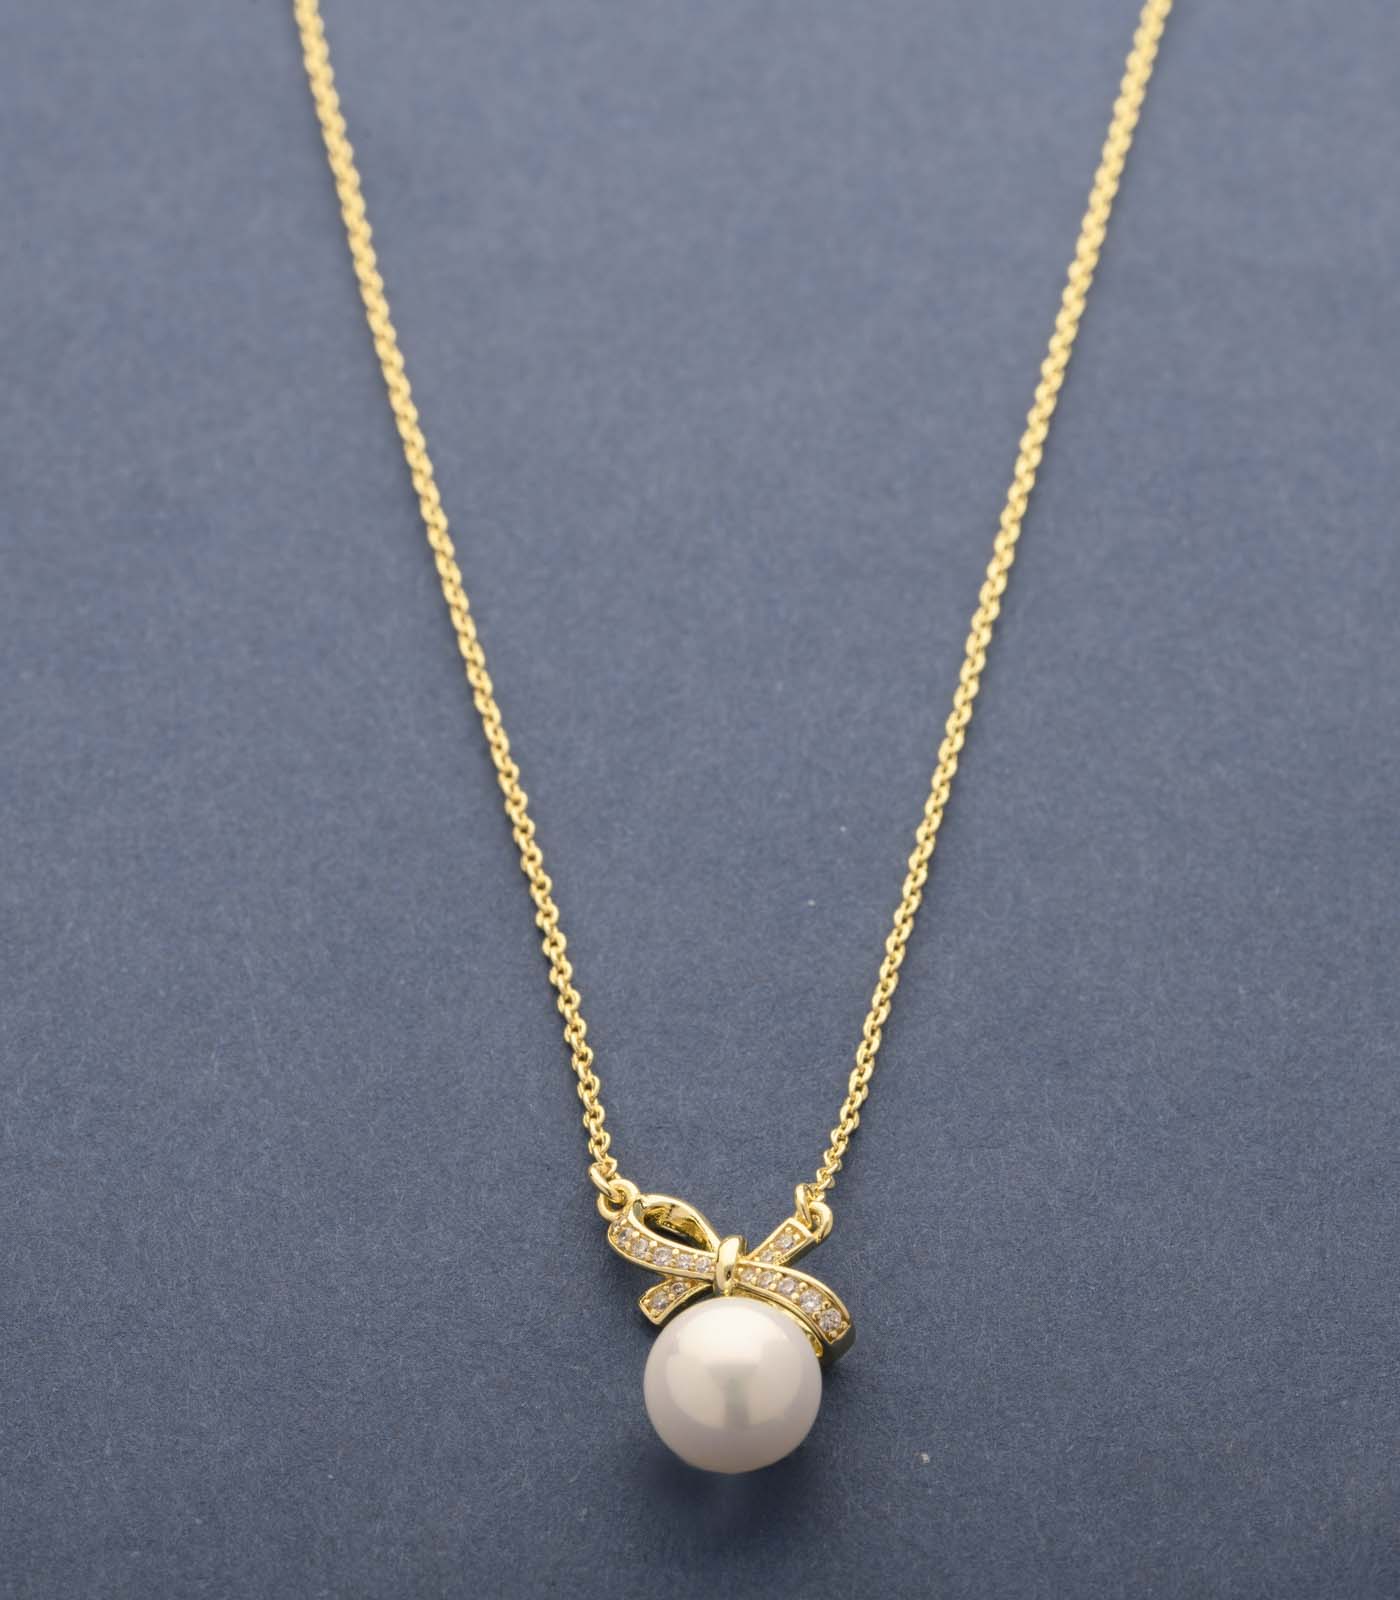 Striking Golden Plated Knot Of White Pearl Necklace (Brass)